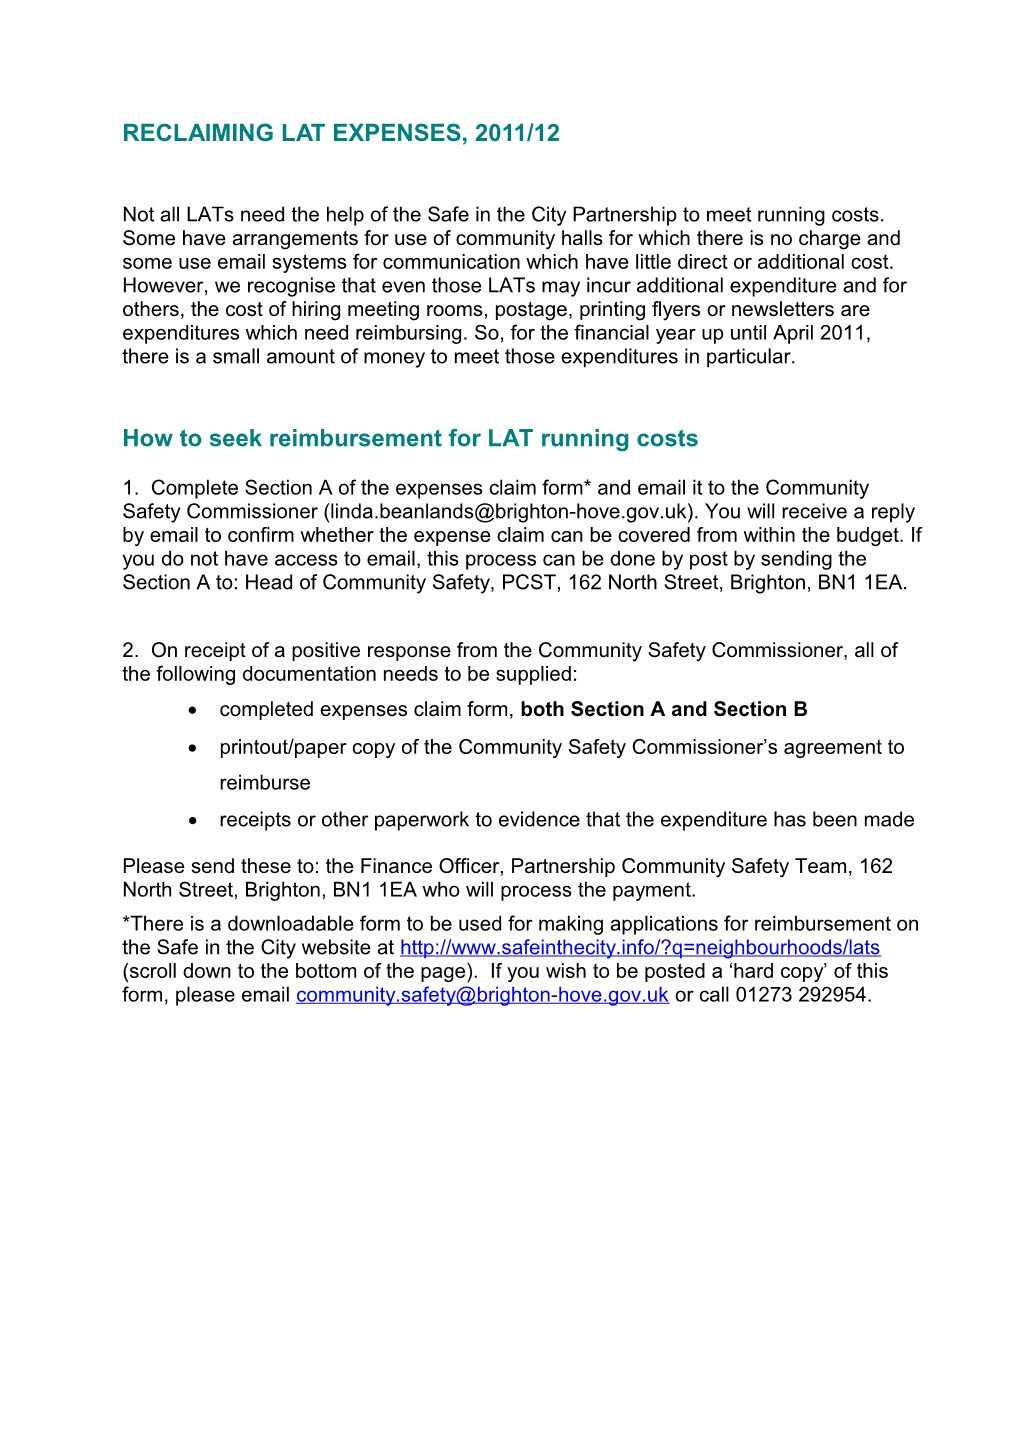 How to Reclaim Lat Expenses, 2009/10